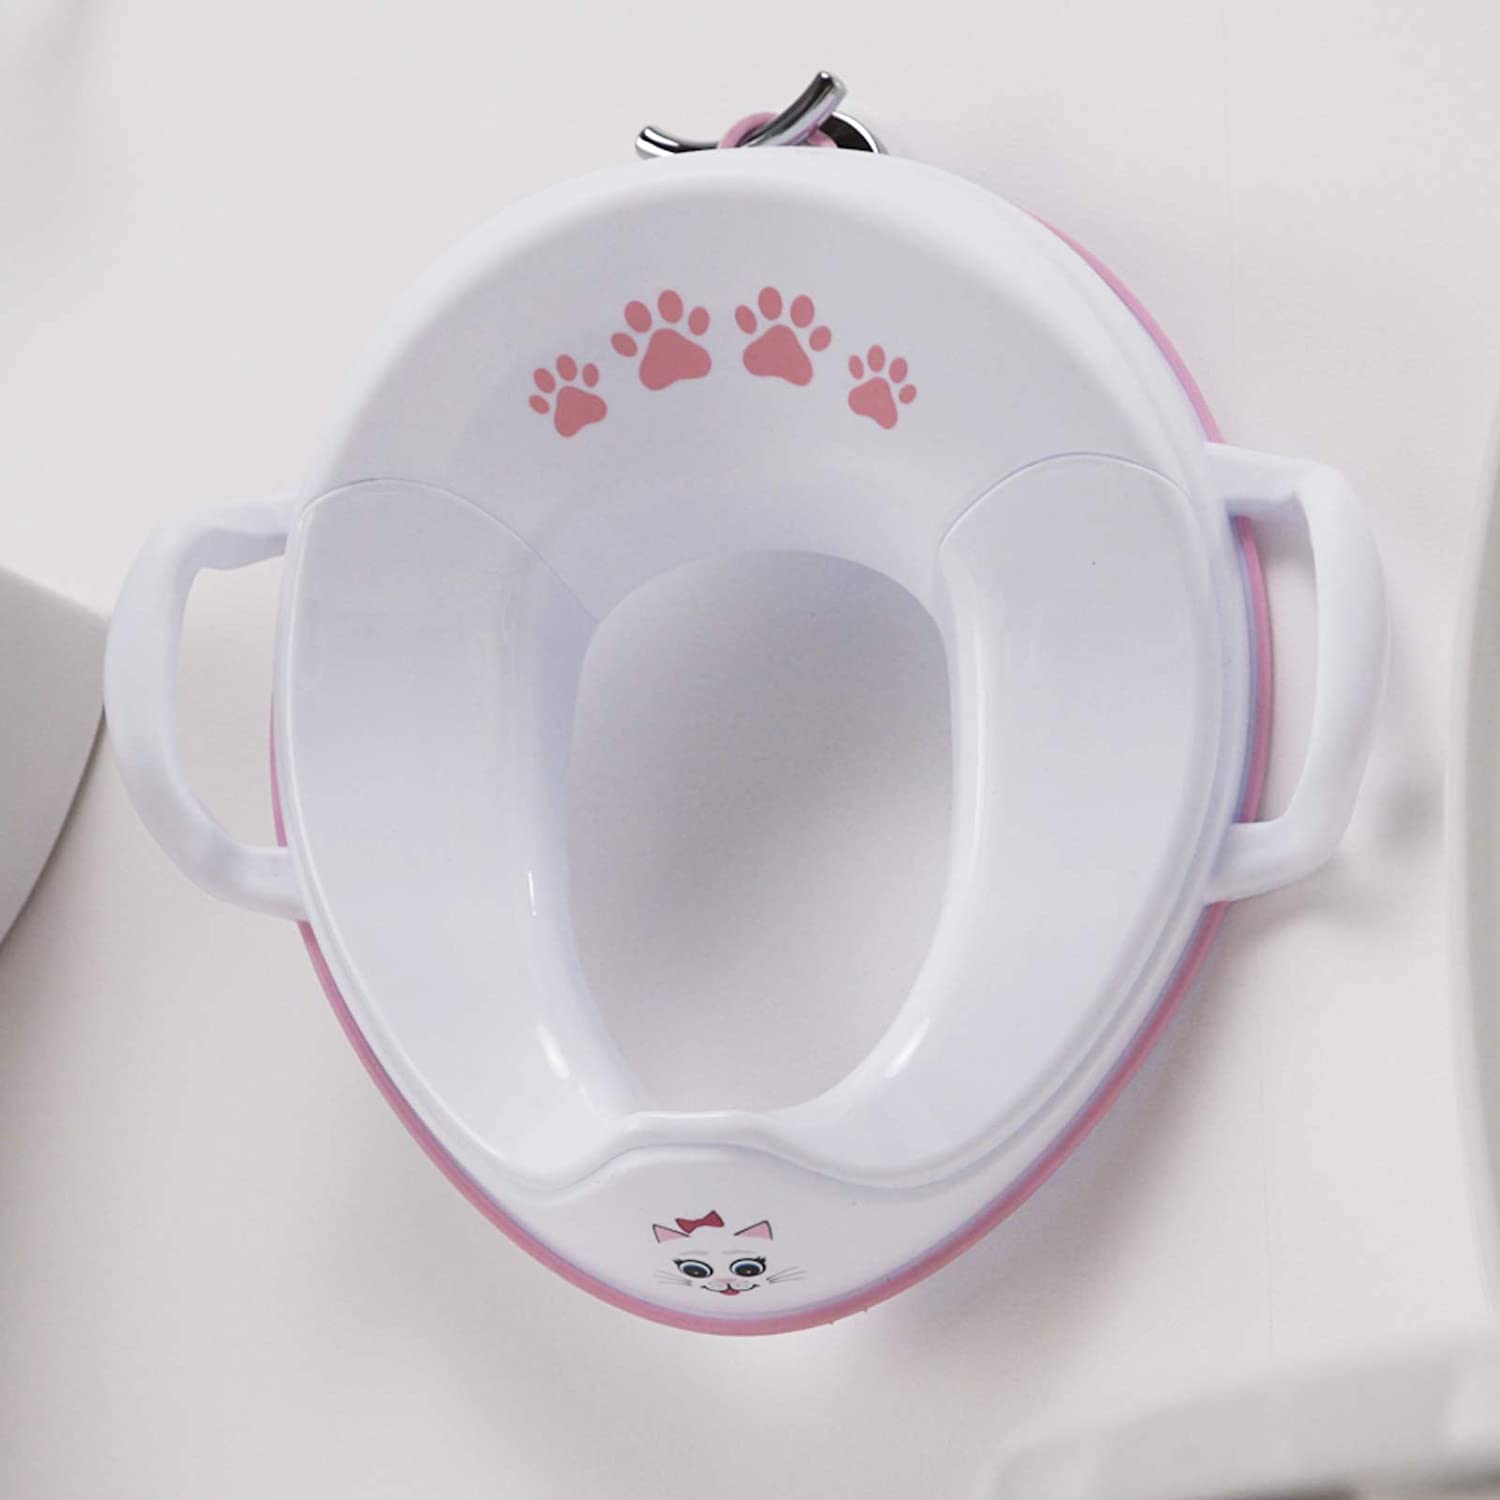 My Carry Potty - Toddler Kids My Little Trainer Seat Cow, Toilet Seat for Potty Training